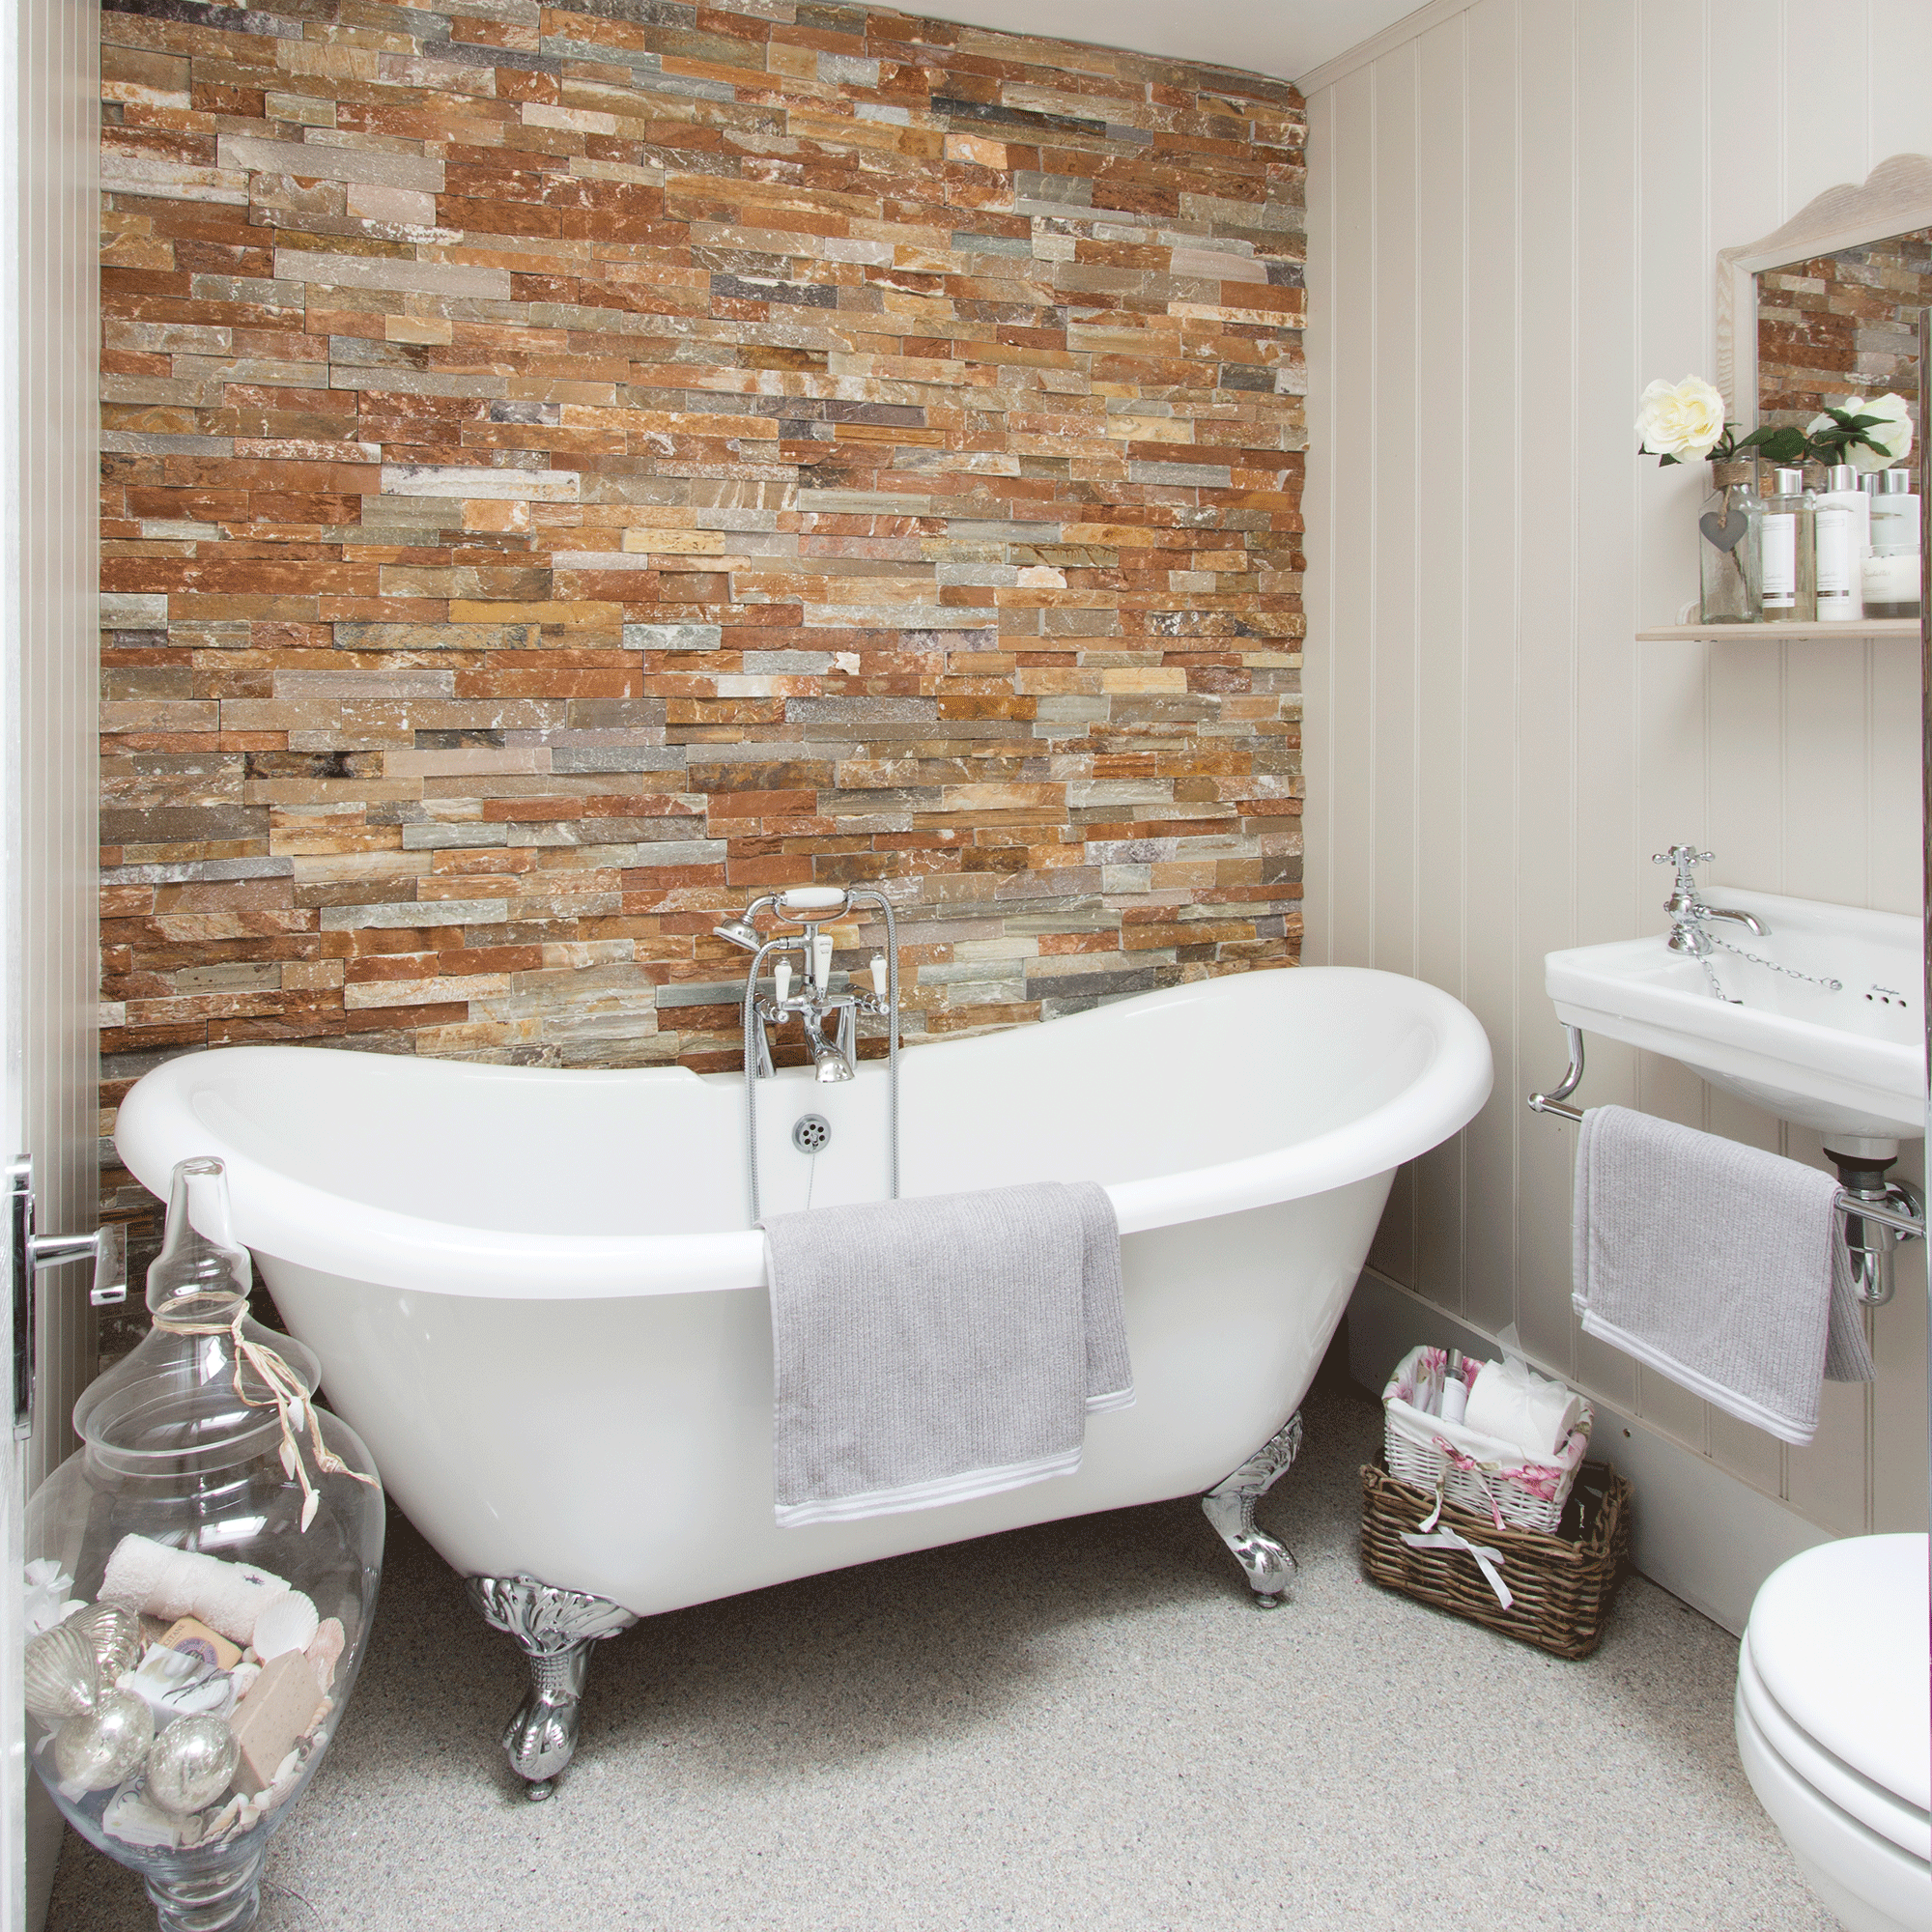 White bathtub with red brick wall